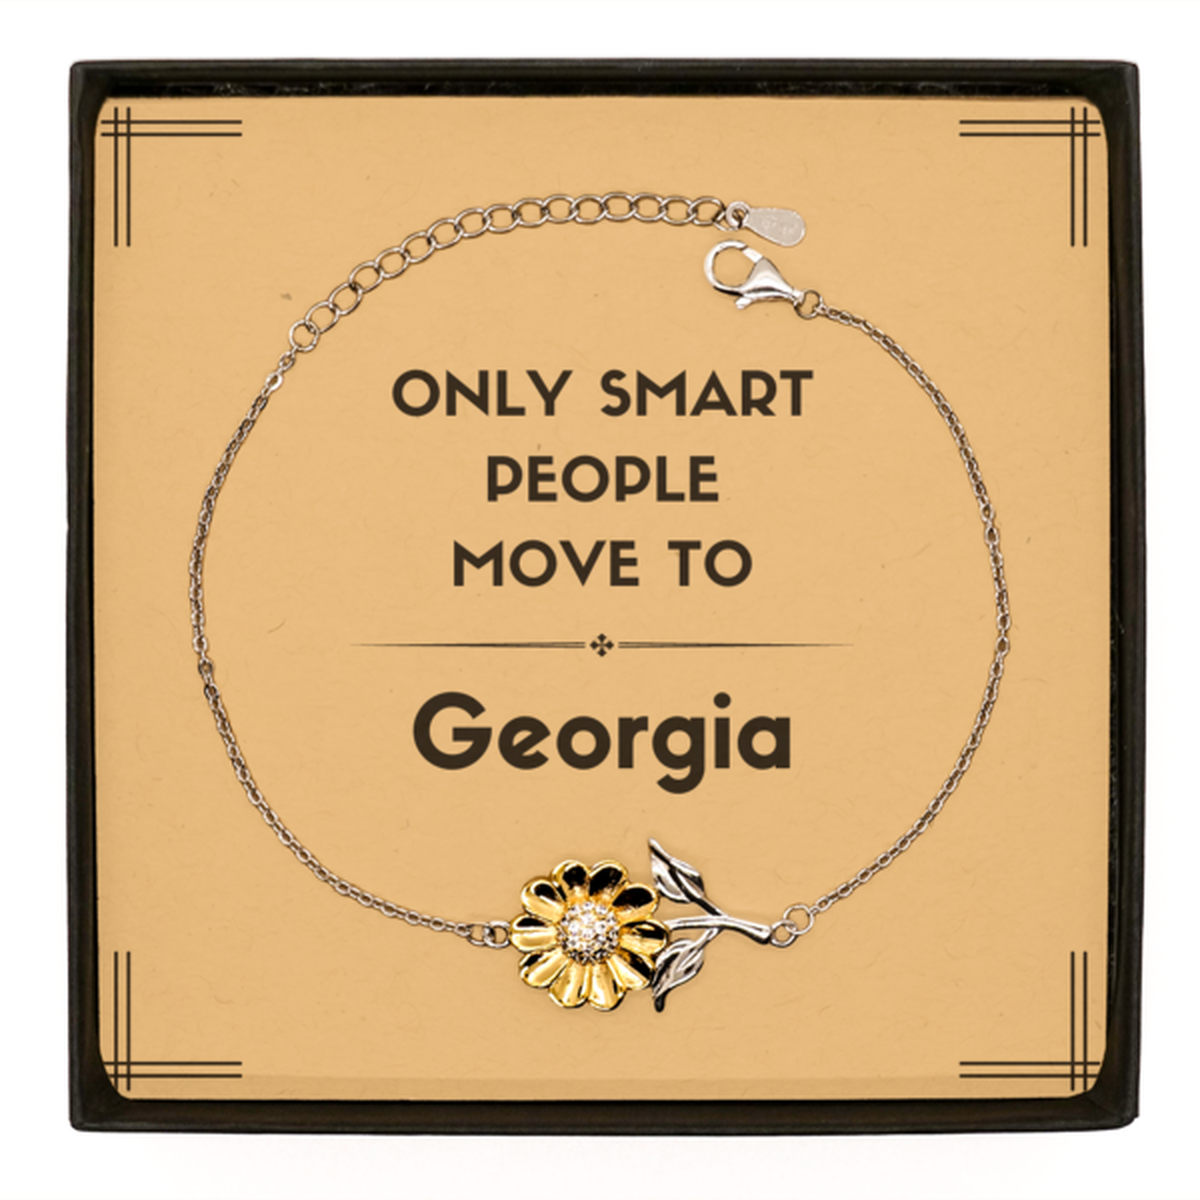 Only smart people move to Georgia Sunflower Bracelet, Message Card Gifts For Georgia, Move to Georgia Gifts for Friends Coworker Funny Saying Quote